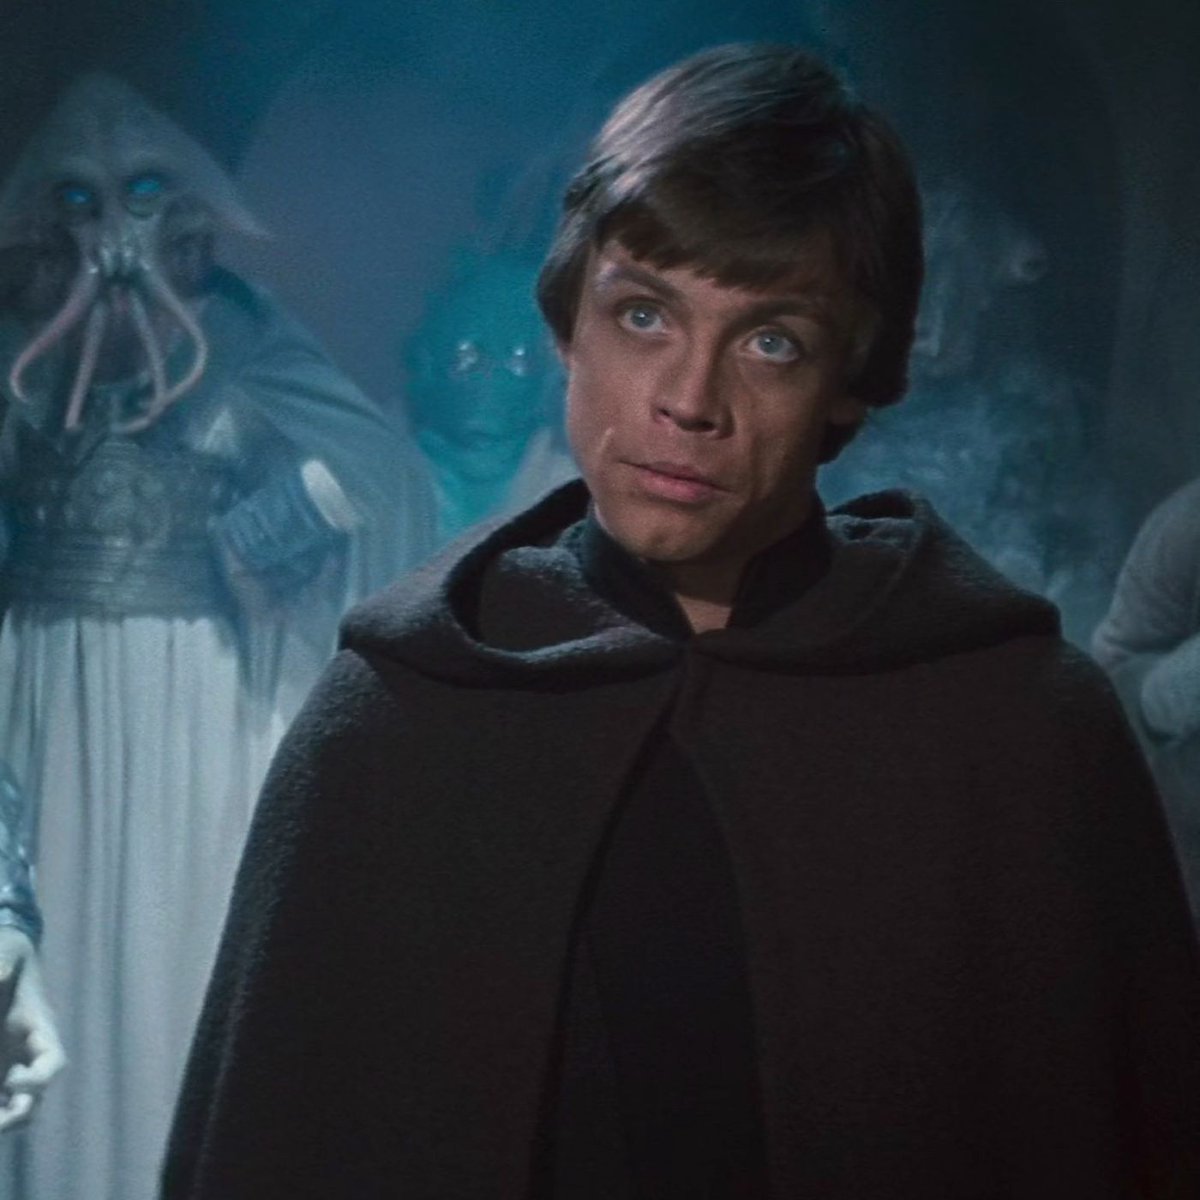 Luke has the ugliest hairstyle in ROTJ like what is that now